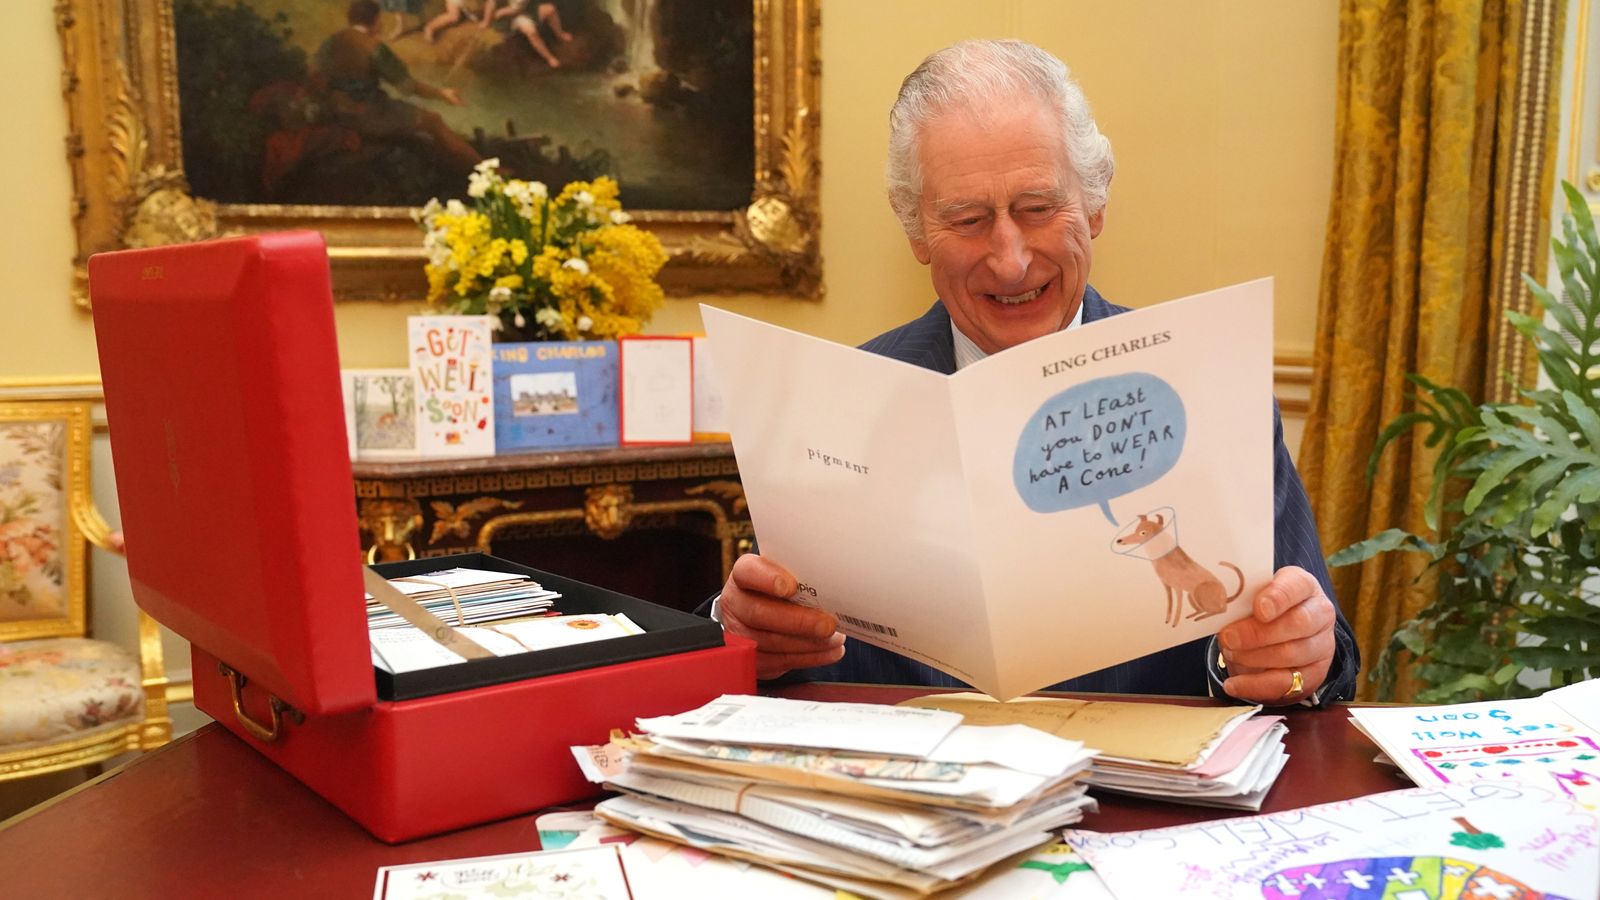 King Charles shown chuckling at get well card featuring dog in a head cone